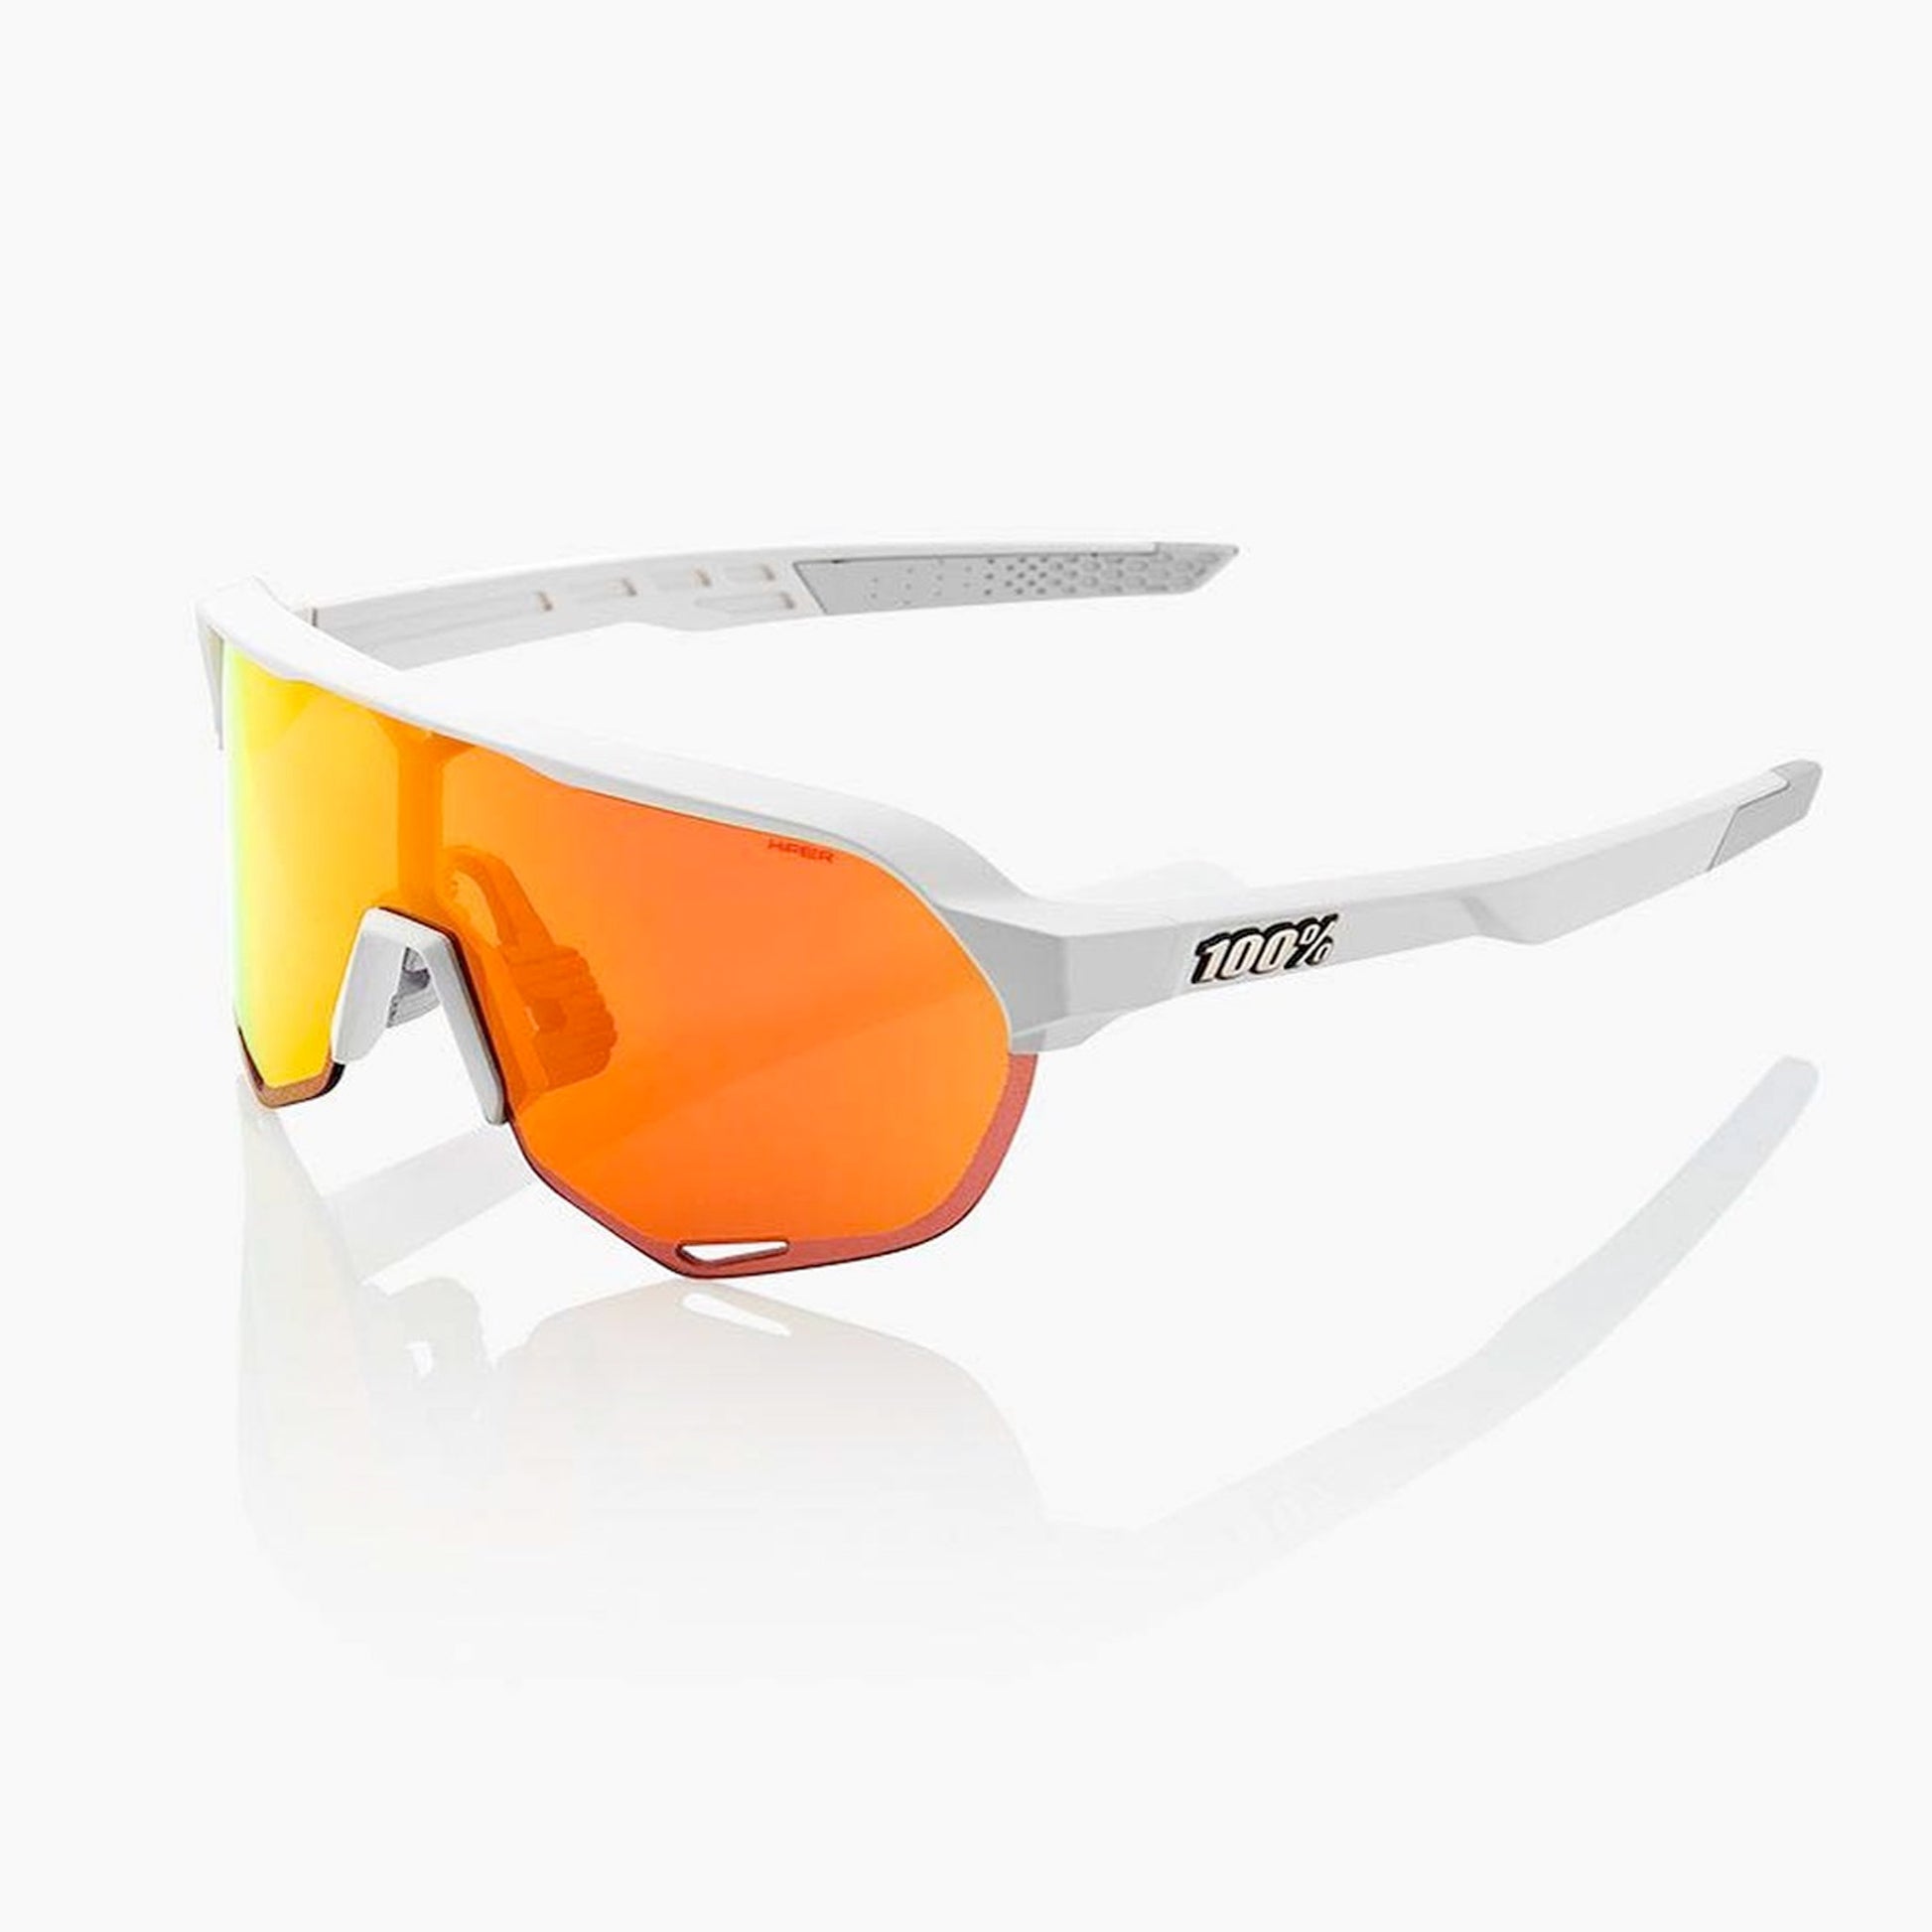 100% S2 Soft Tact Cycling Sunglasses - Off White with HiPER Red Multilayer Mirror Lens + Clear Lens buy online at Woolys Wheels bike shop Sydney